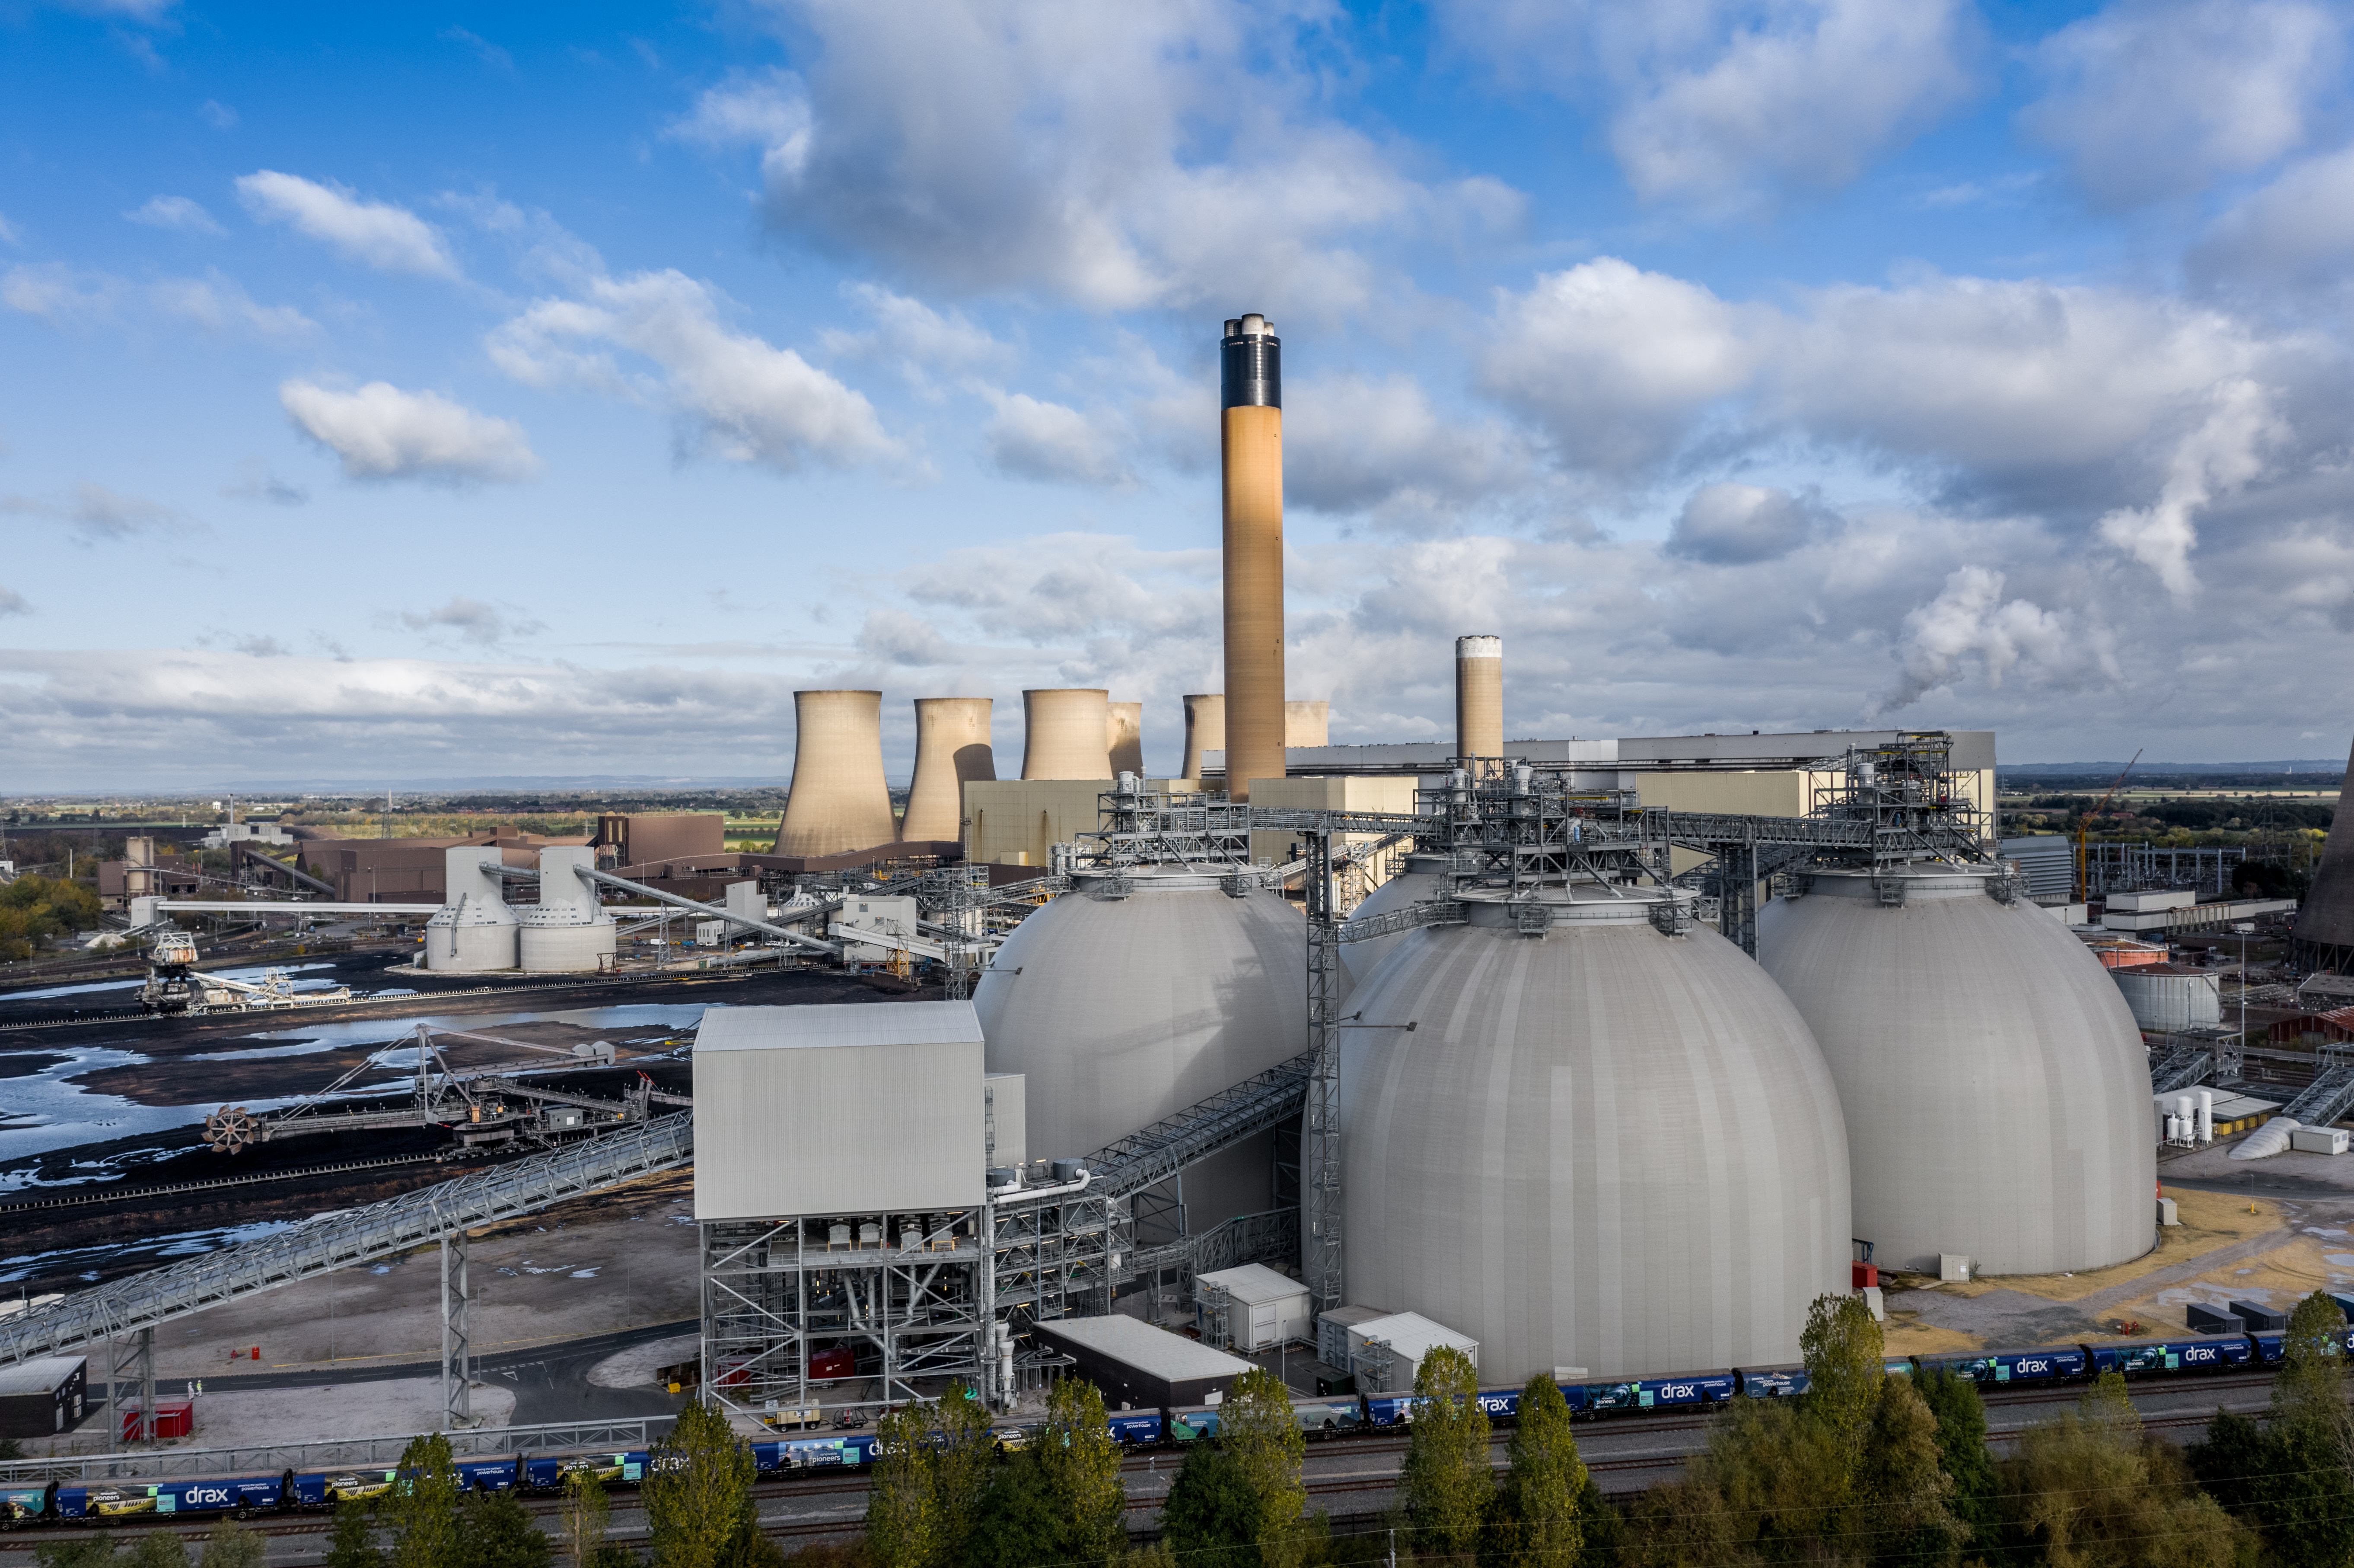 DRAX POWER STATION, YORKSHIRE, UK - NOVEMBER 4, 2021.  An aerial panorama view of Drax Power Station showing Biomass stortage tanks and carbon capture capabilities